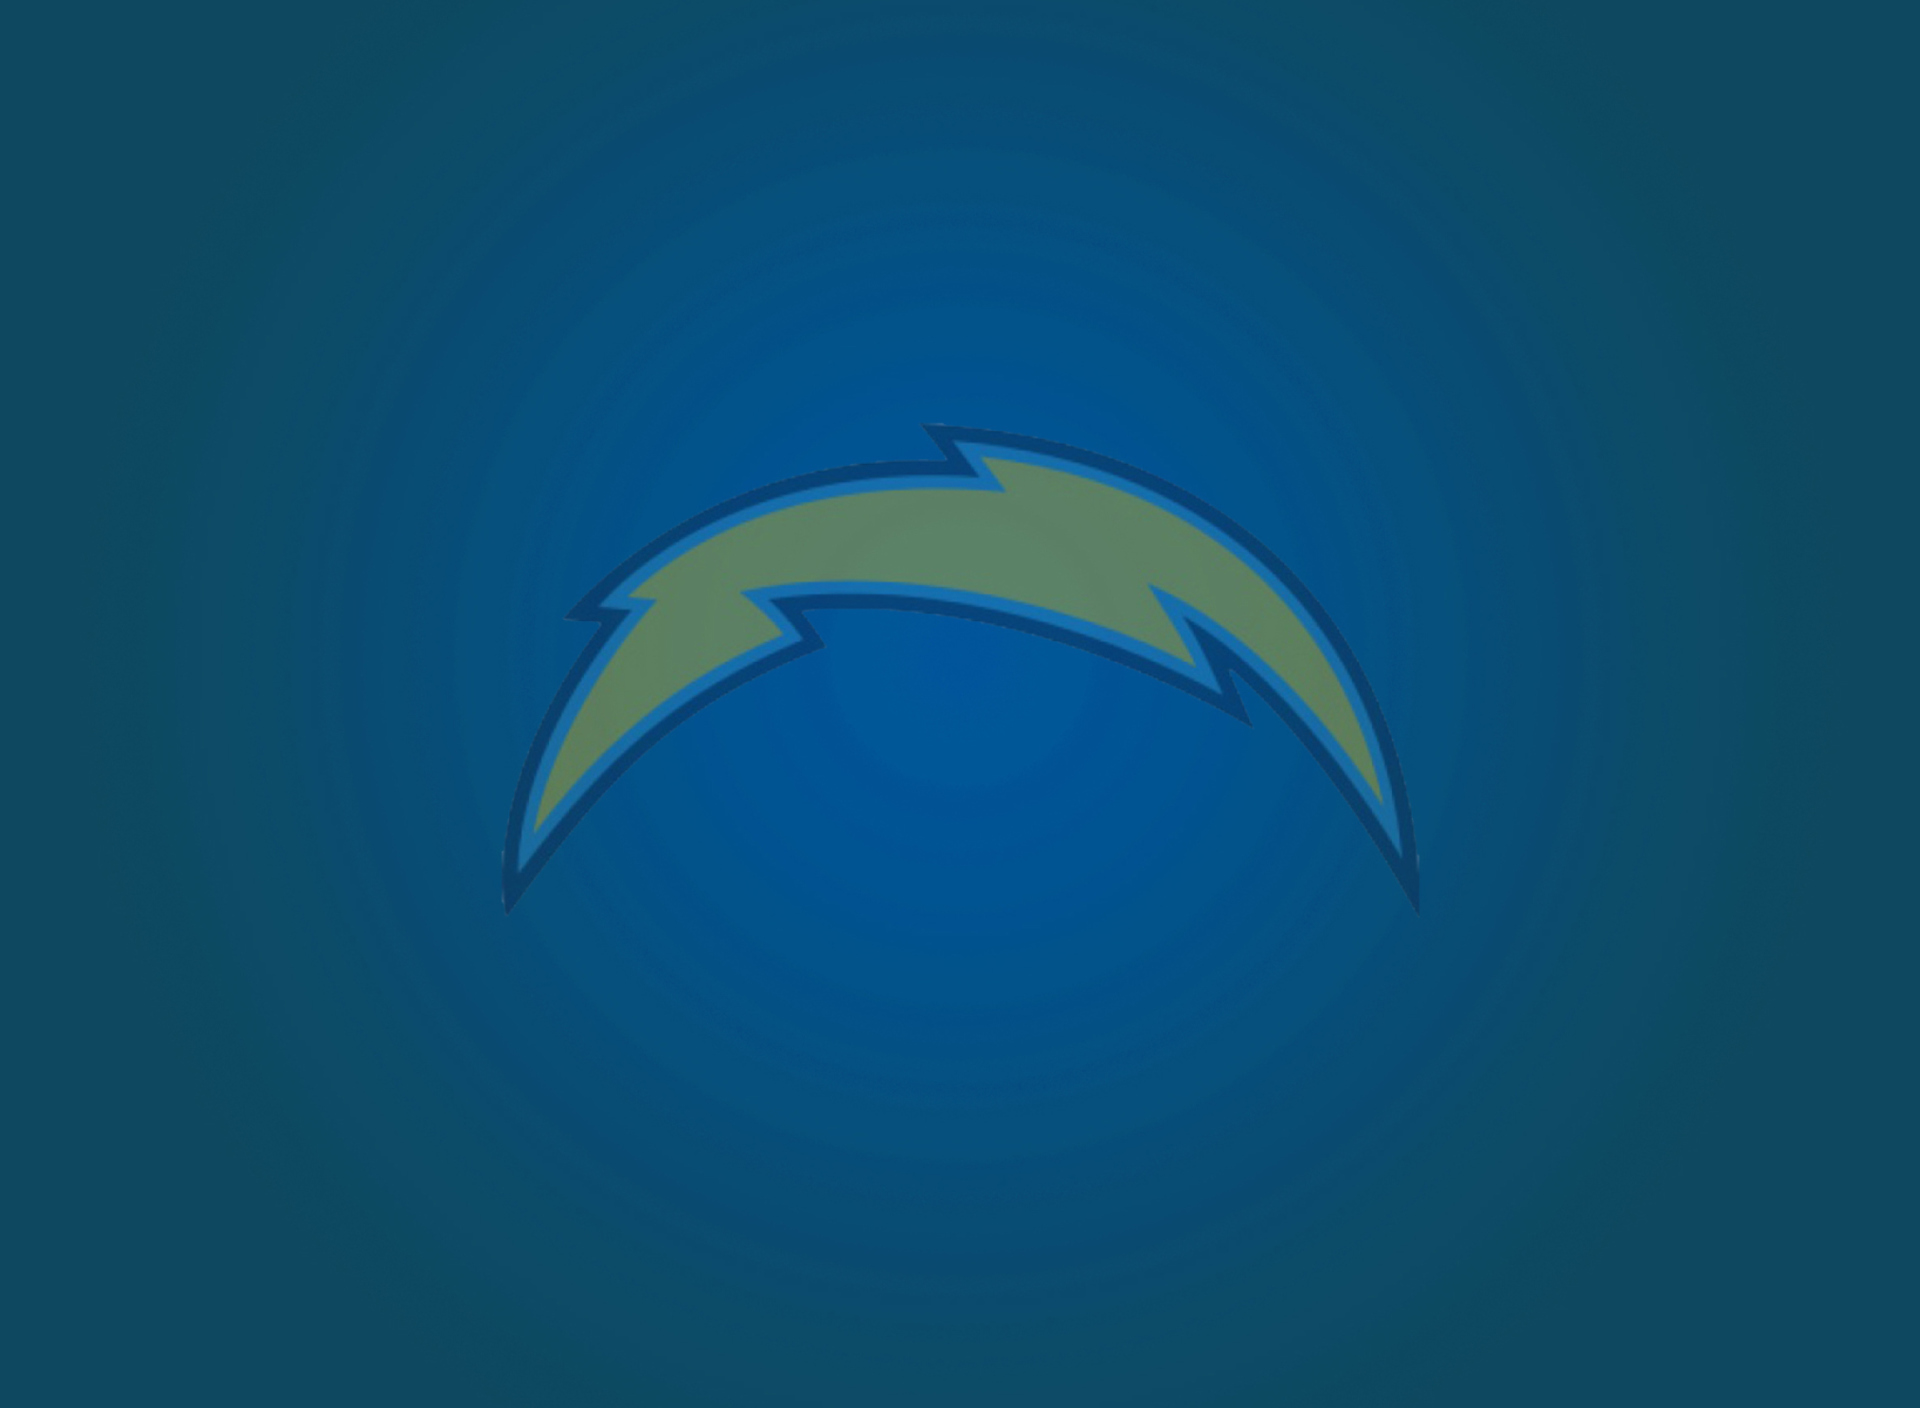 San Diego Chargers Wallpaper for Samsung Galaxy Note